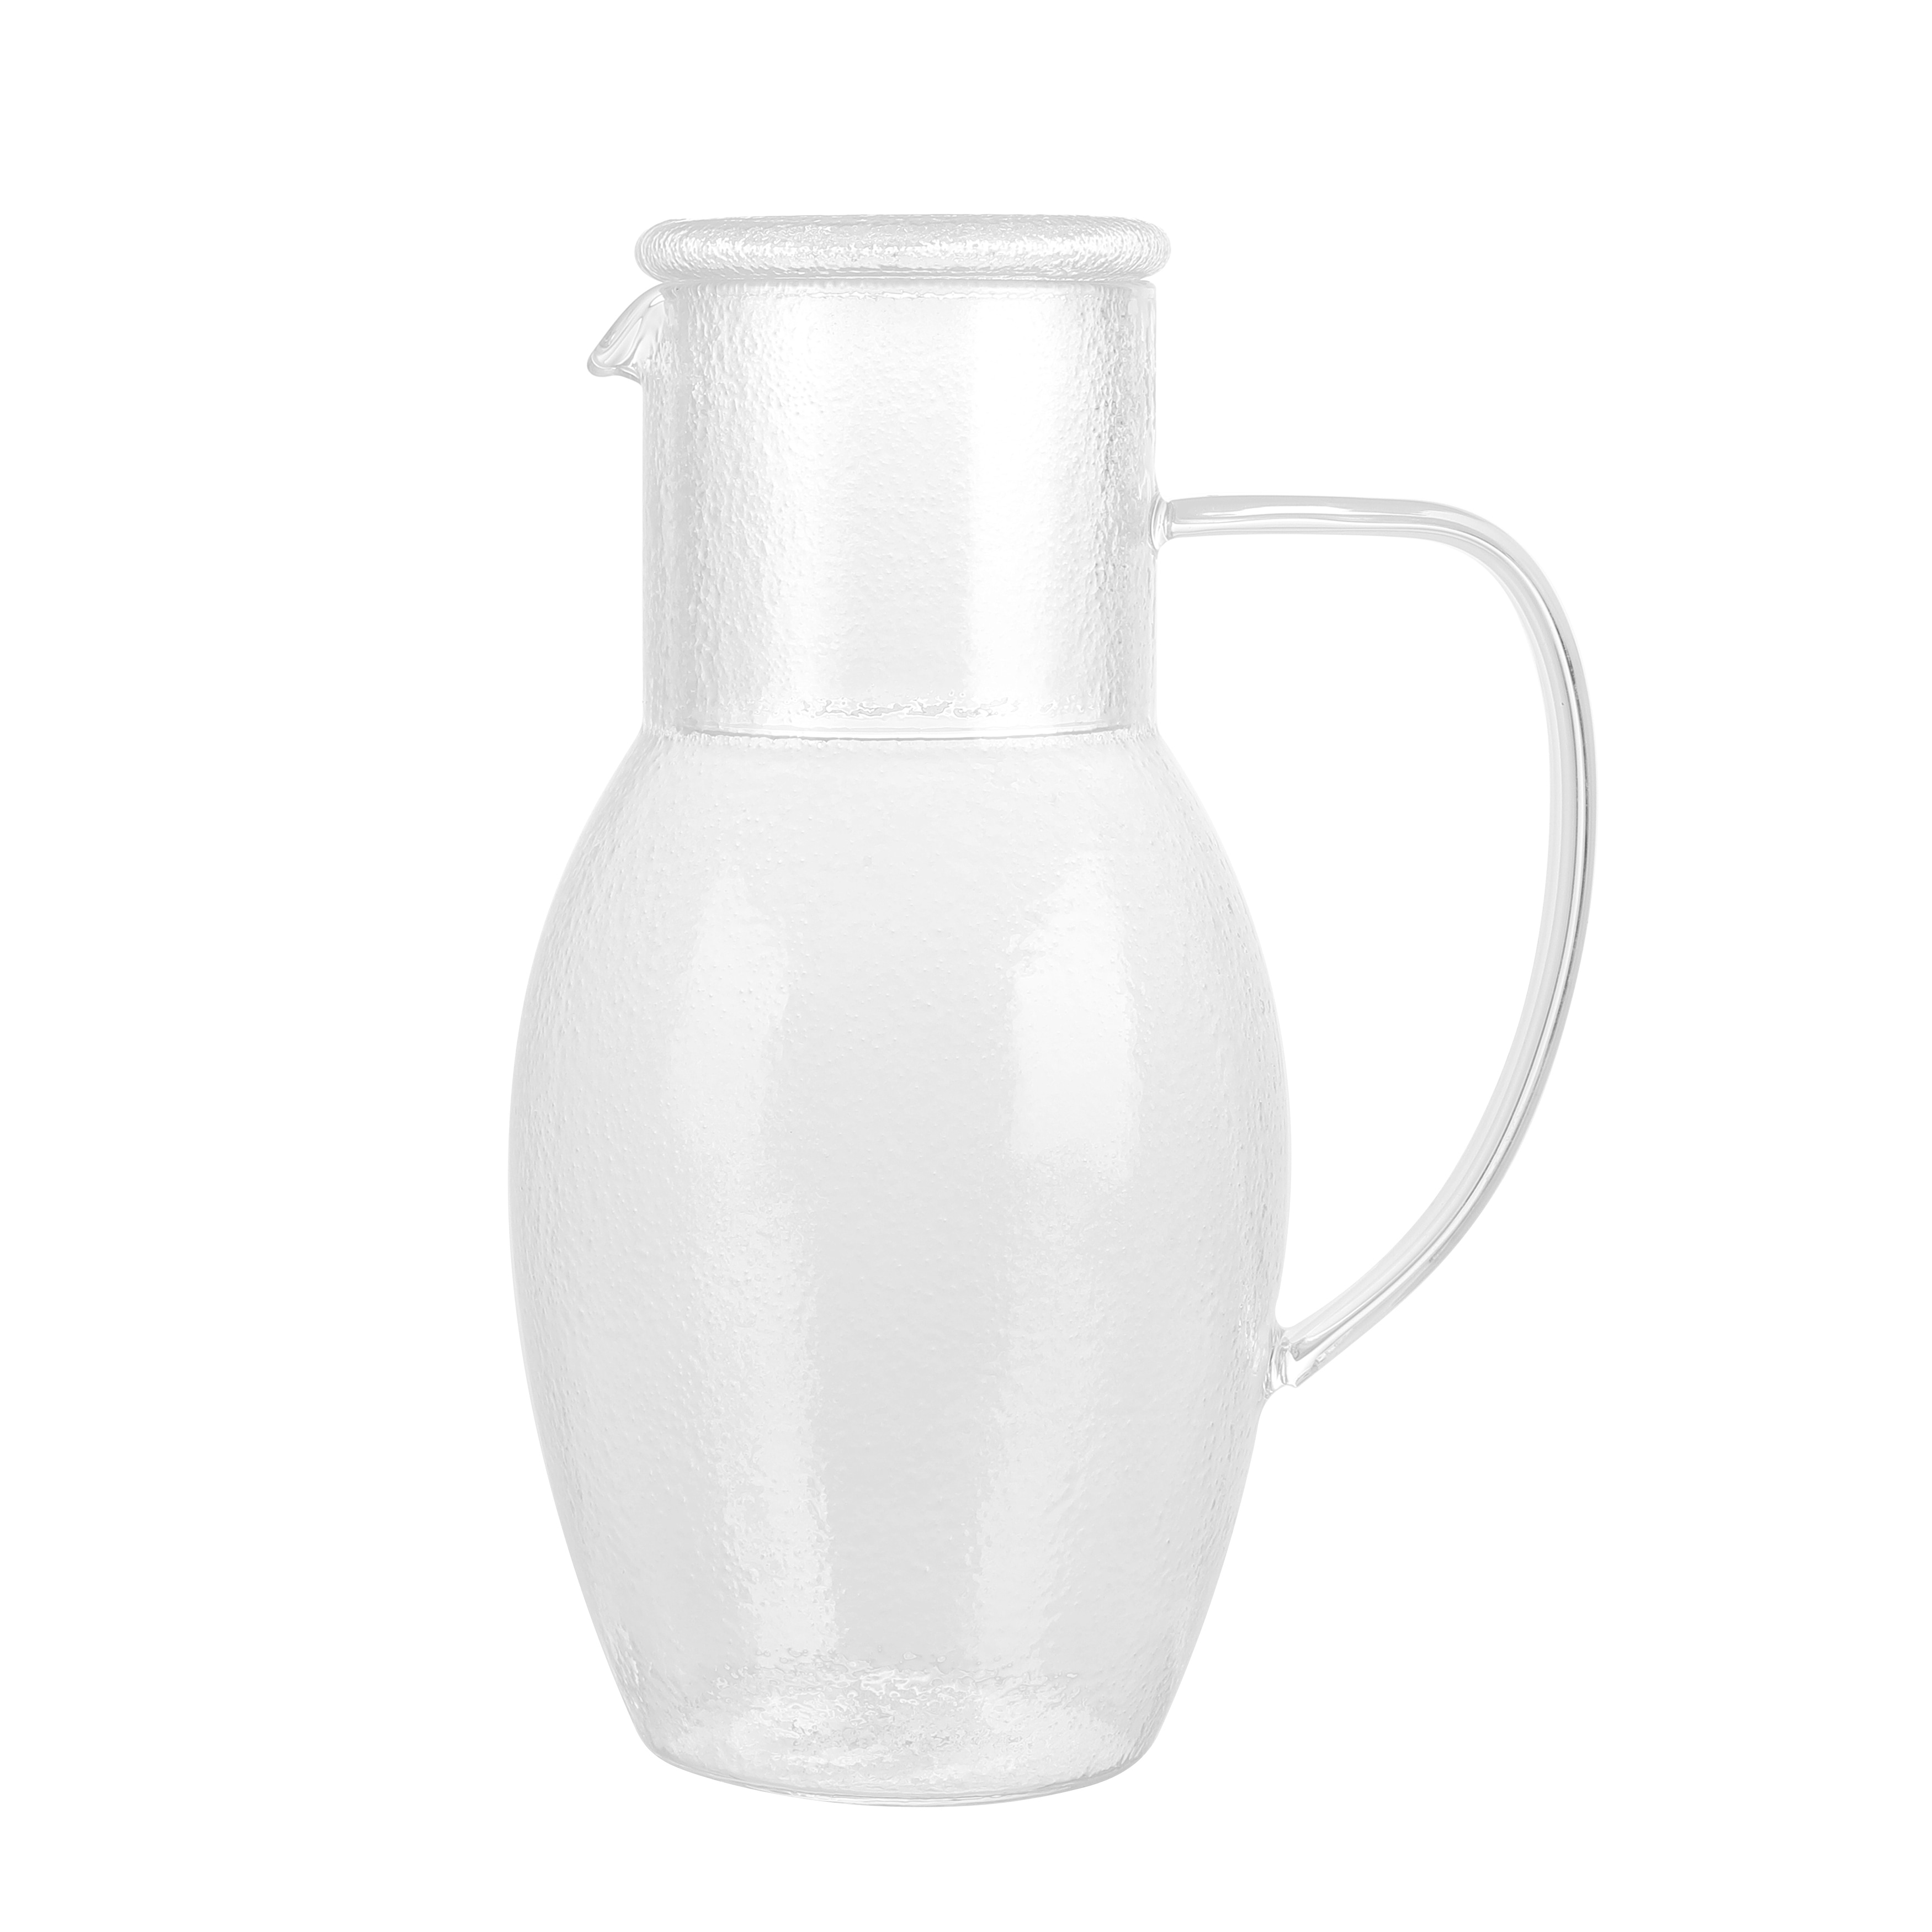 https://ak1.ostkcdn.com/images/products/is/images/direct/14cf898d2ff9816aebf426bc8d6799520d002403/Elle-Decor-Bedside-Pitcher-Set-Carafe-with-Cup.jpg